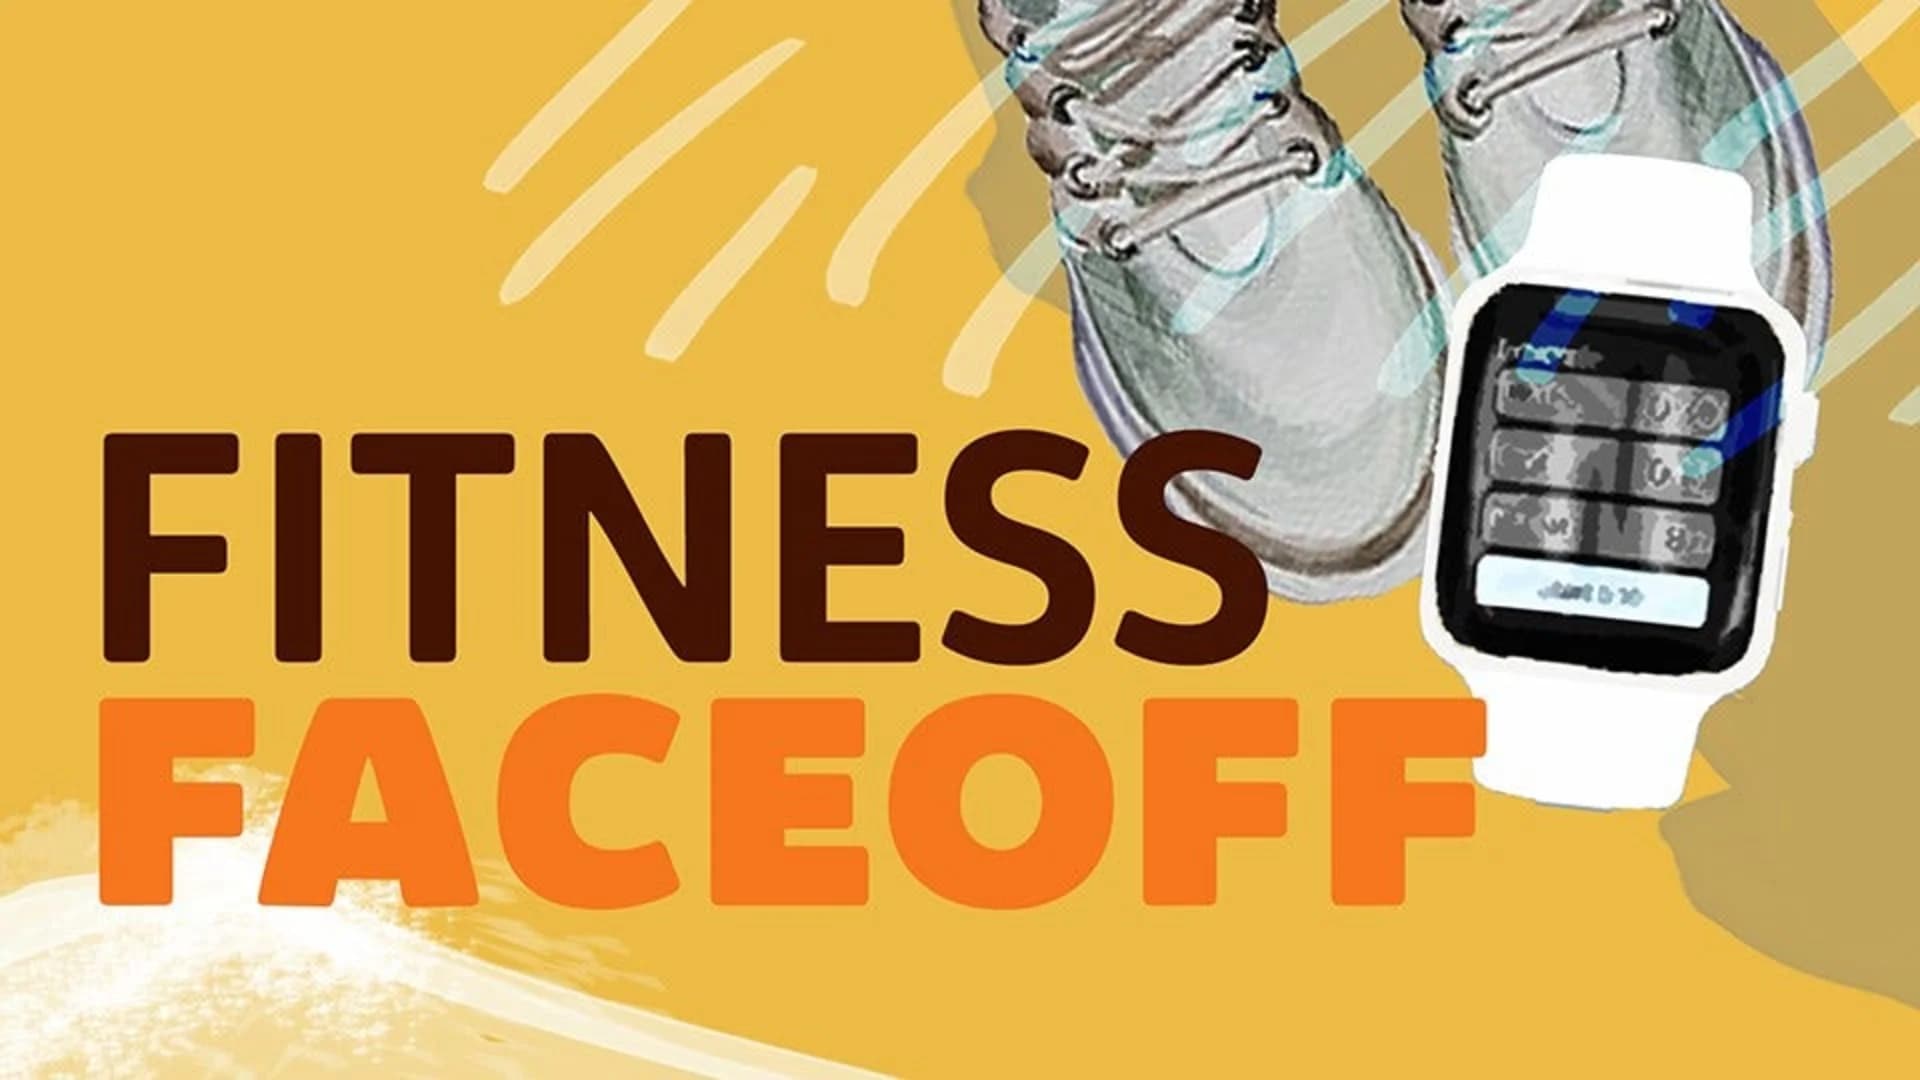 Fitness Face-off crosses the finish line in the Hudson Valley